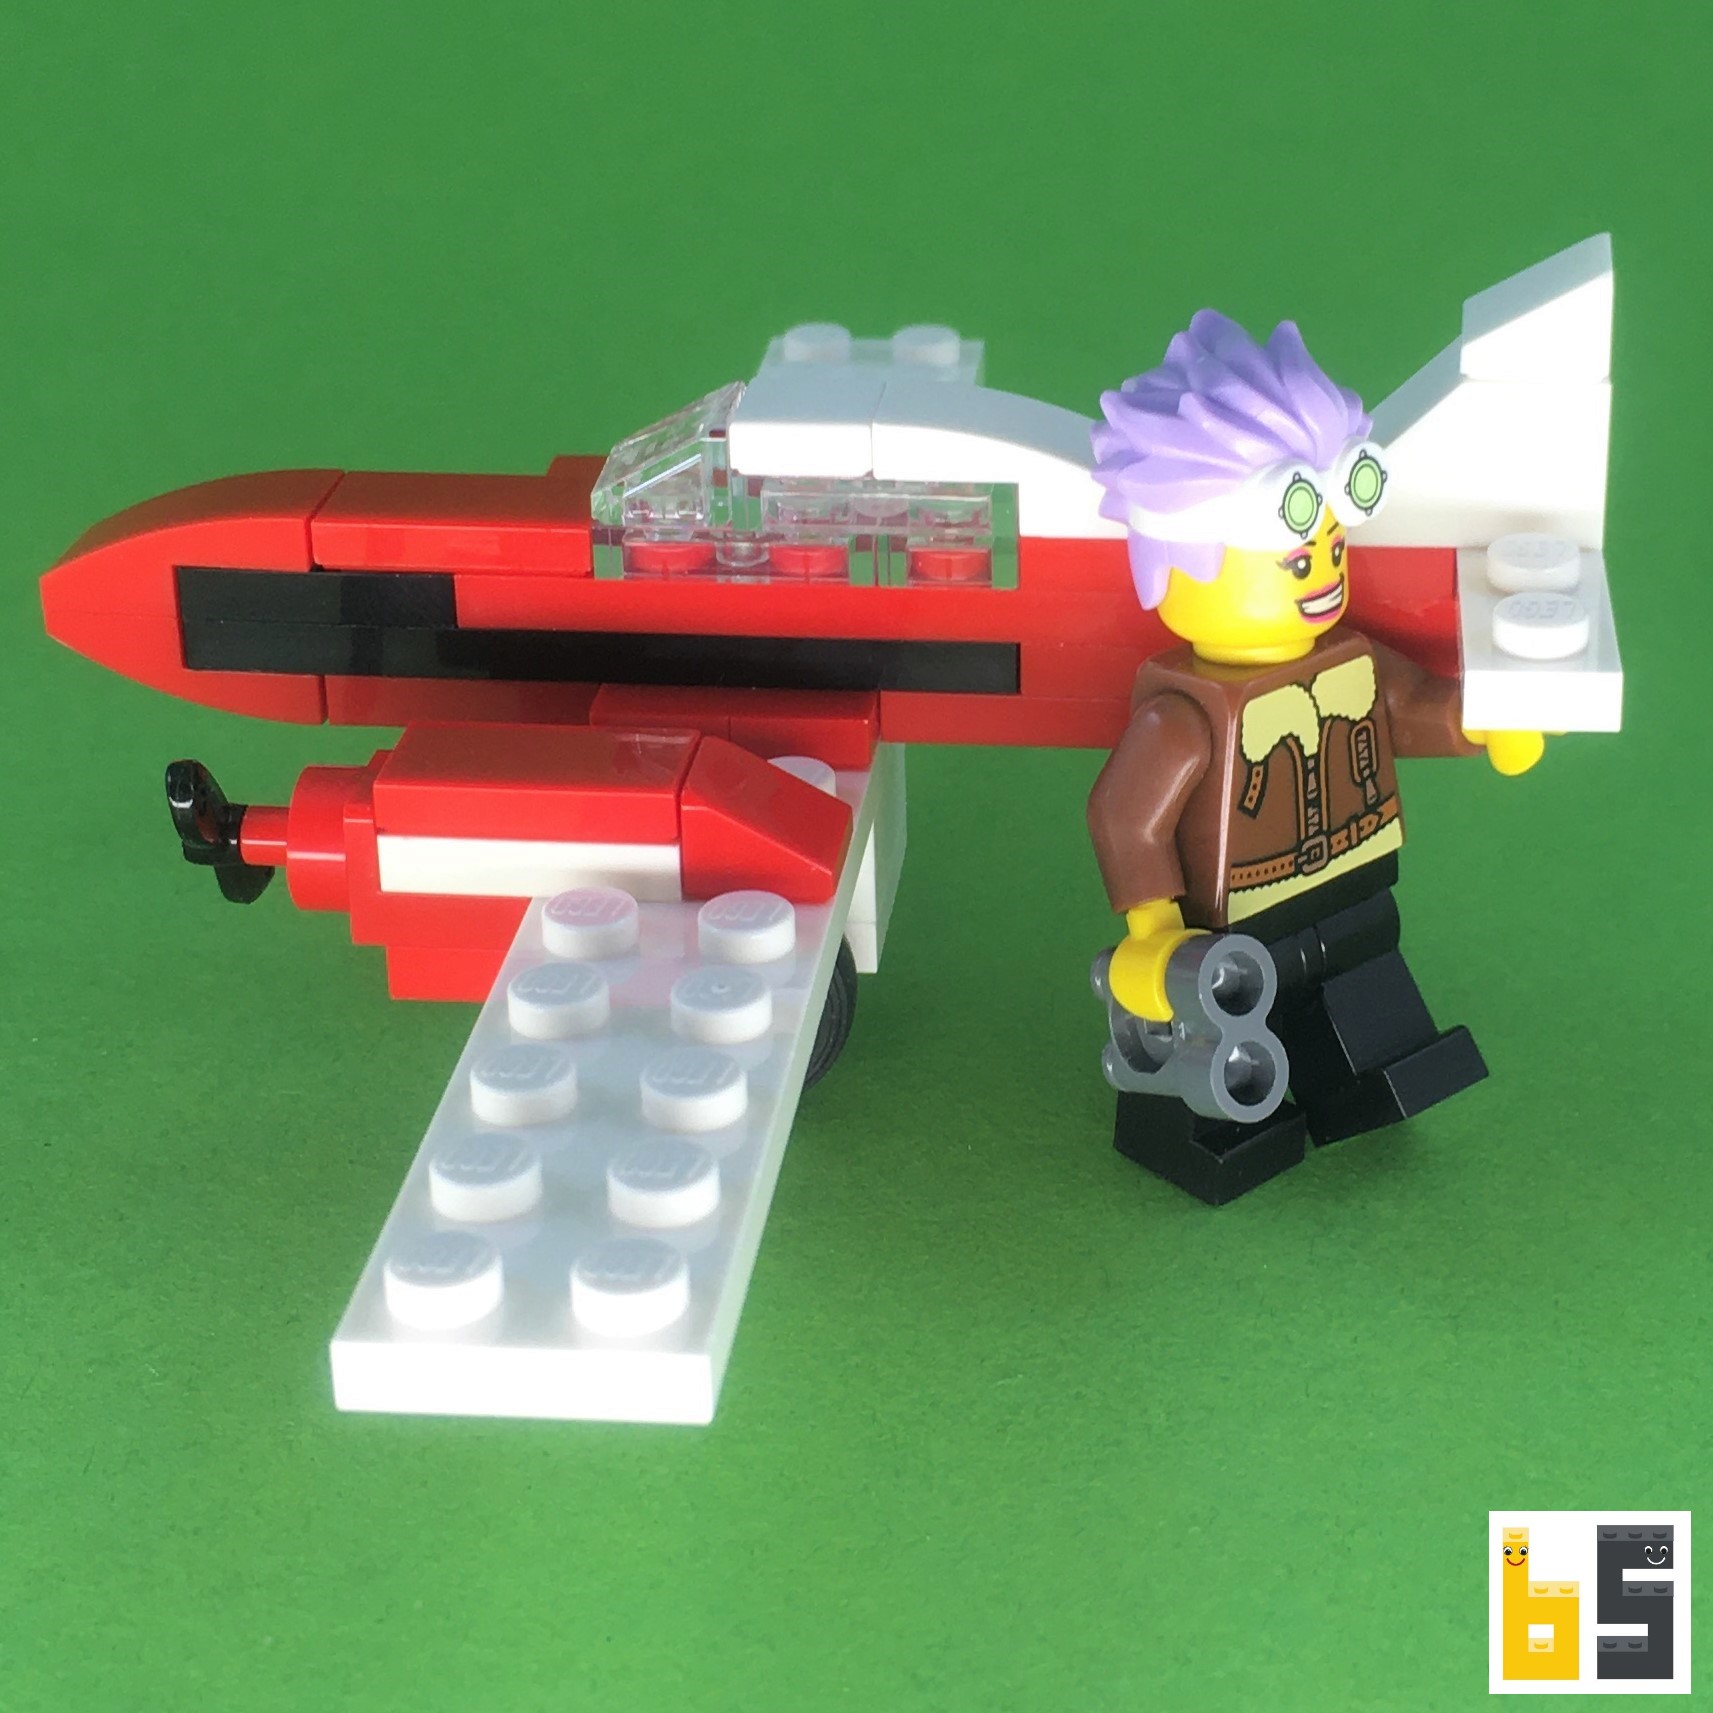 Read more about the article LEGO fliegt um die Welt